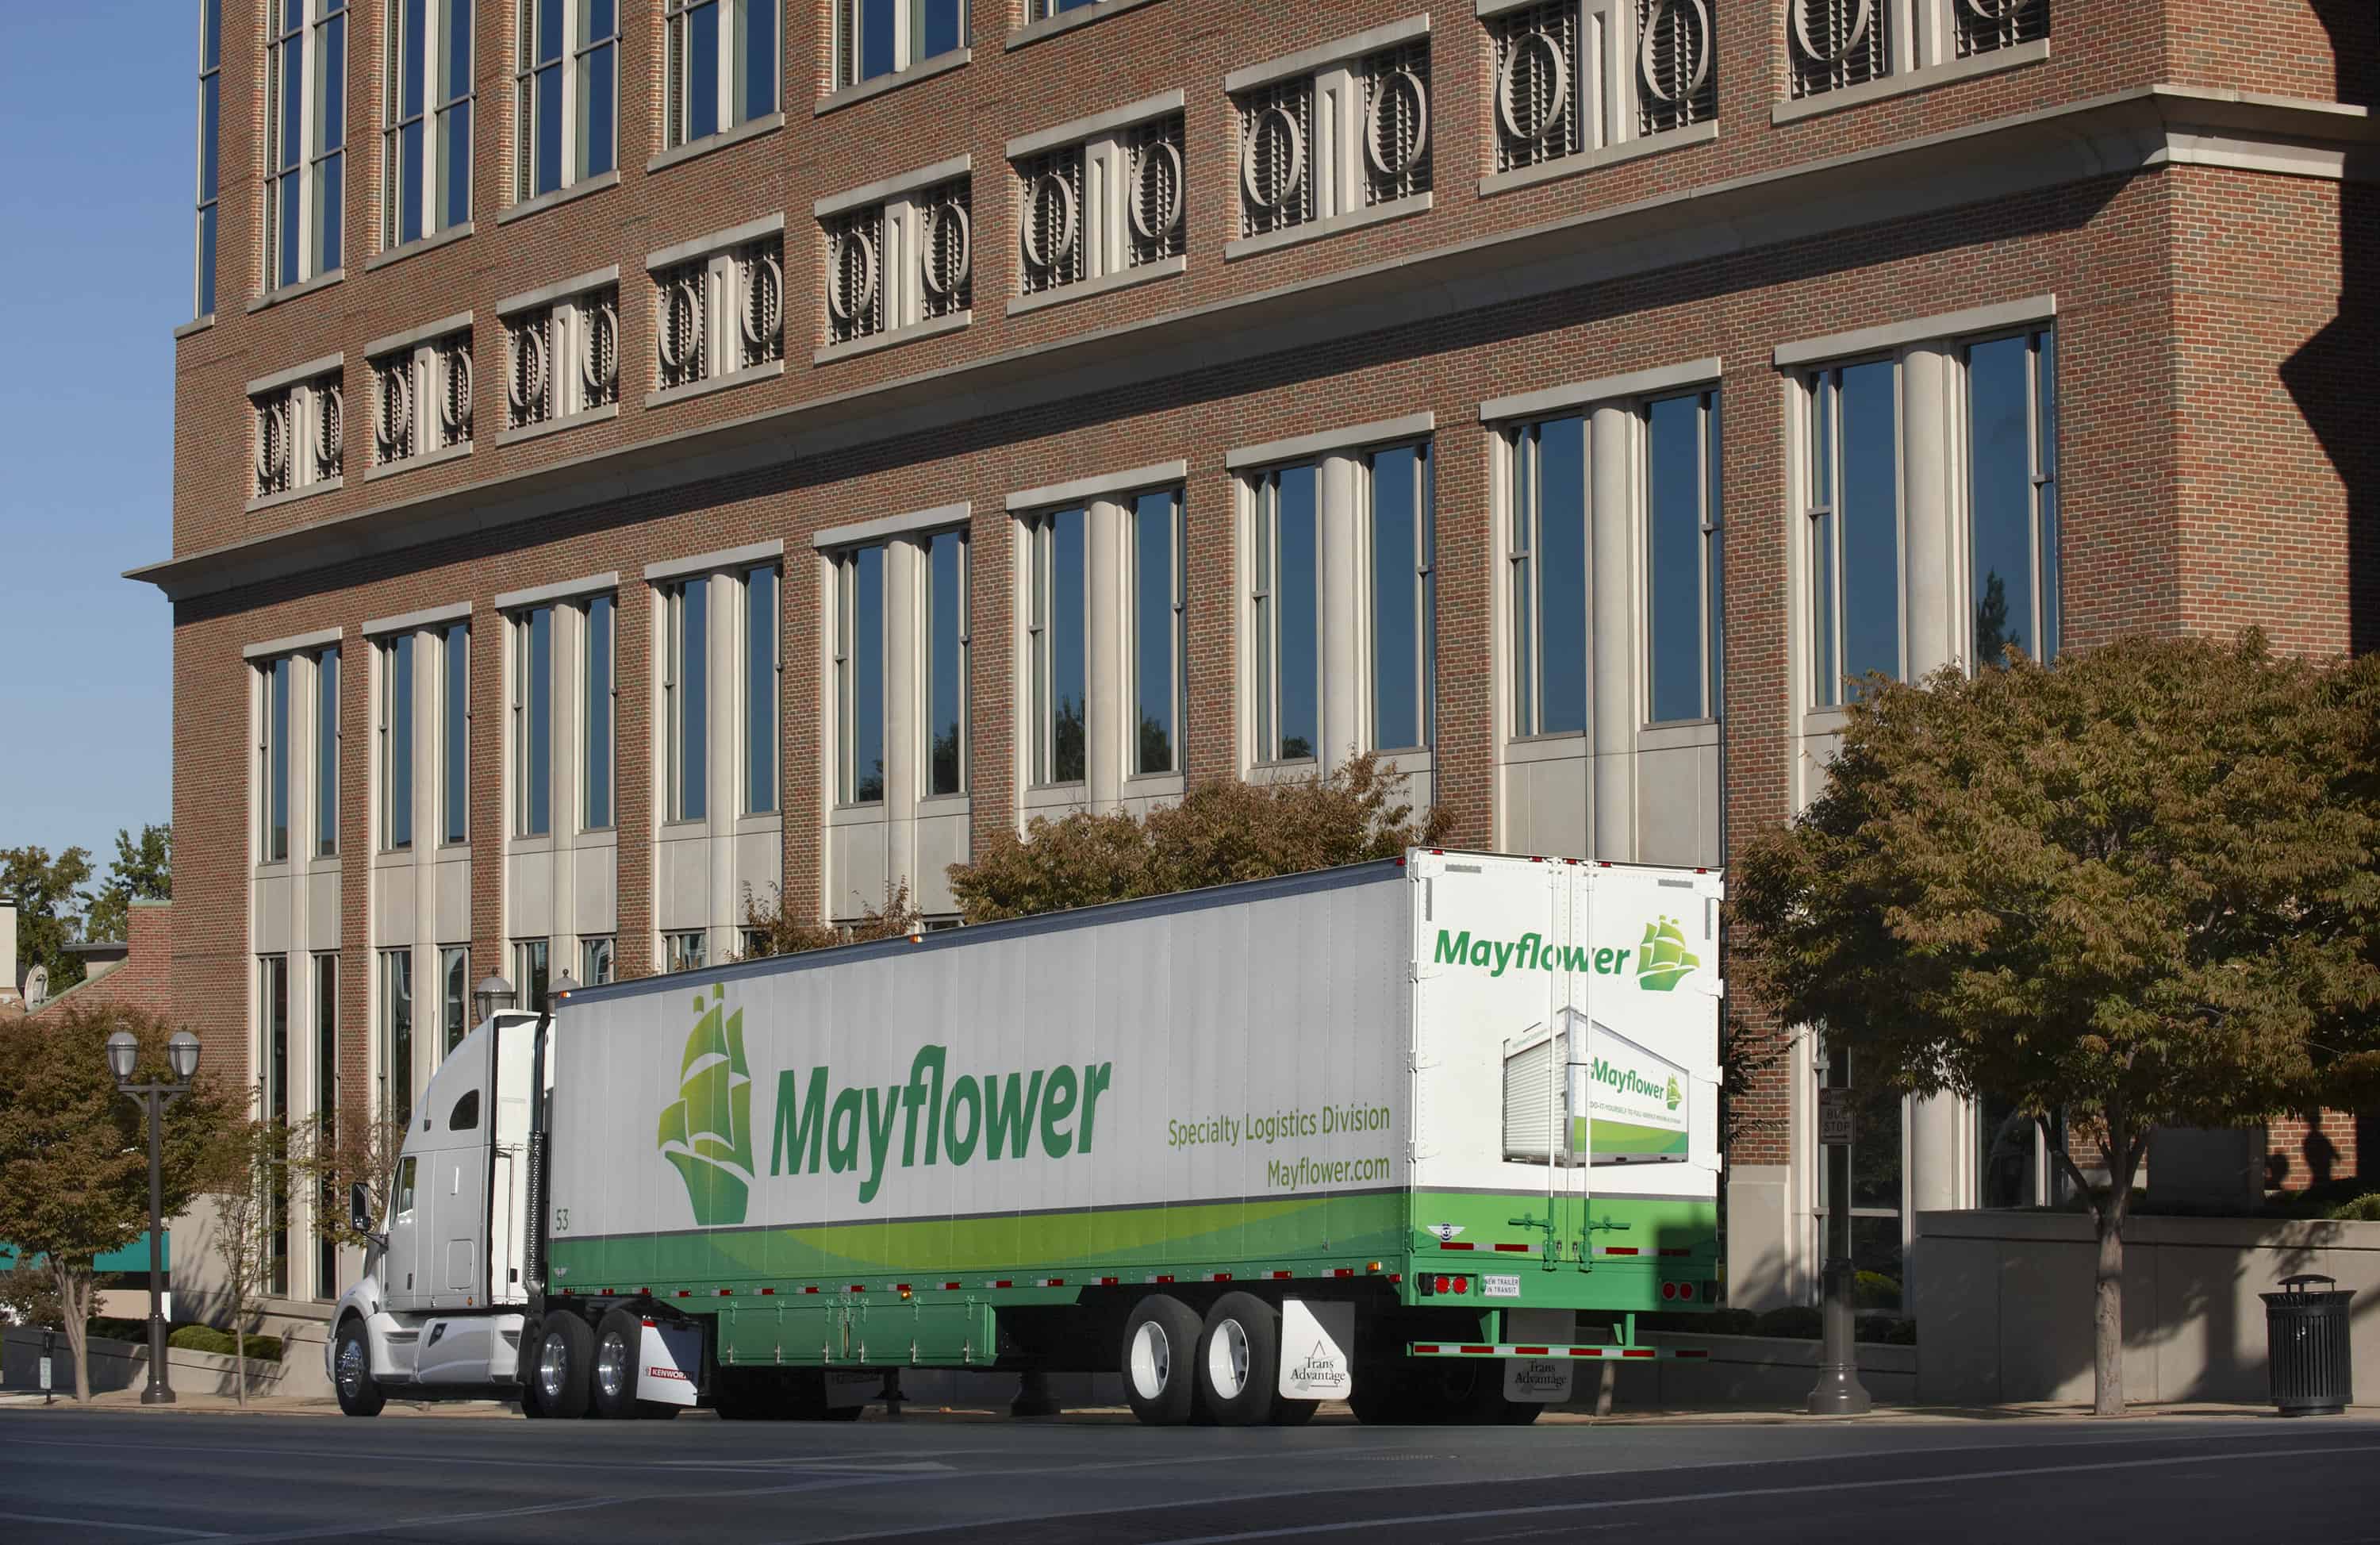 Mayflower moving truck in front of a high rise building - Mayflower®